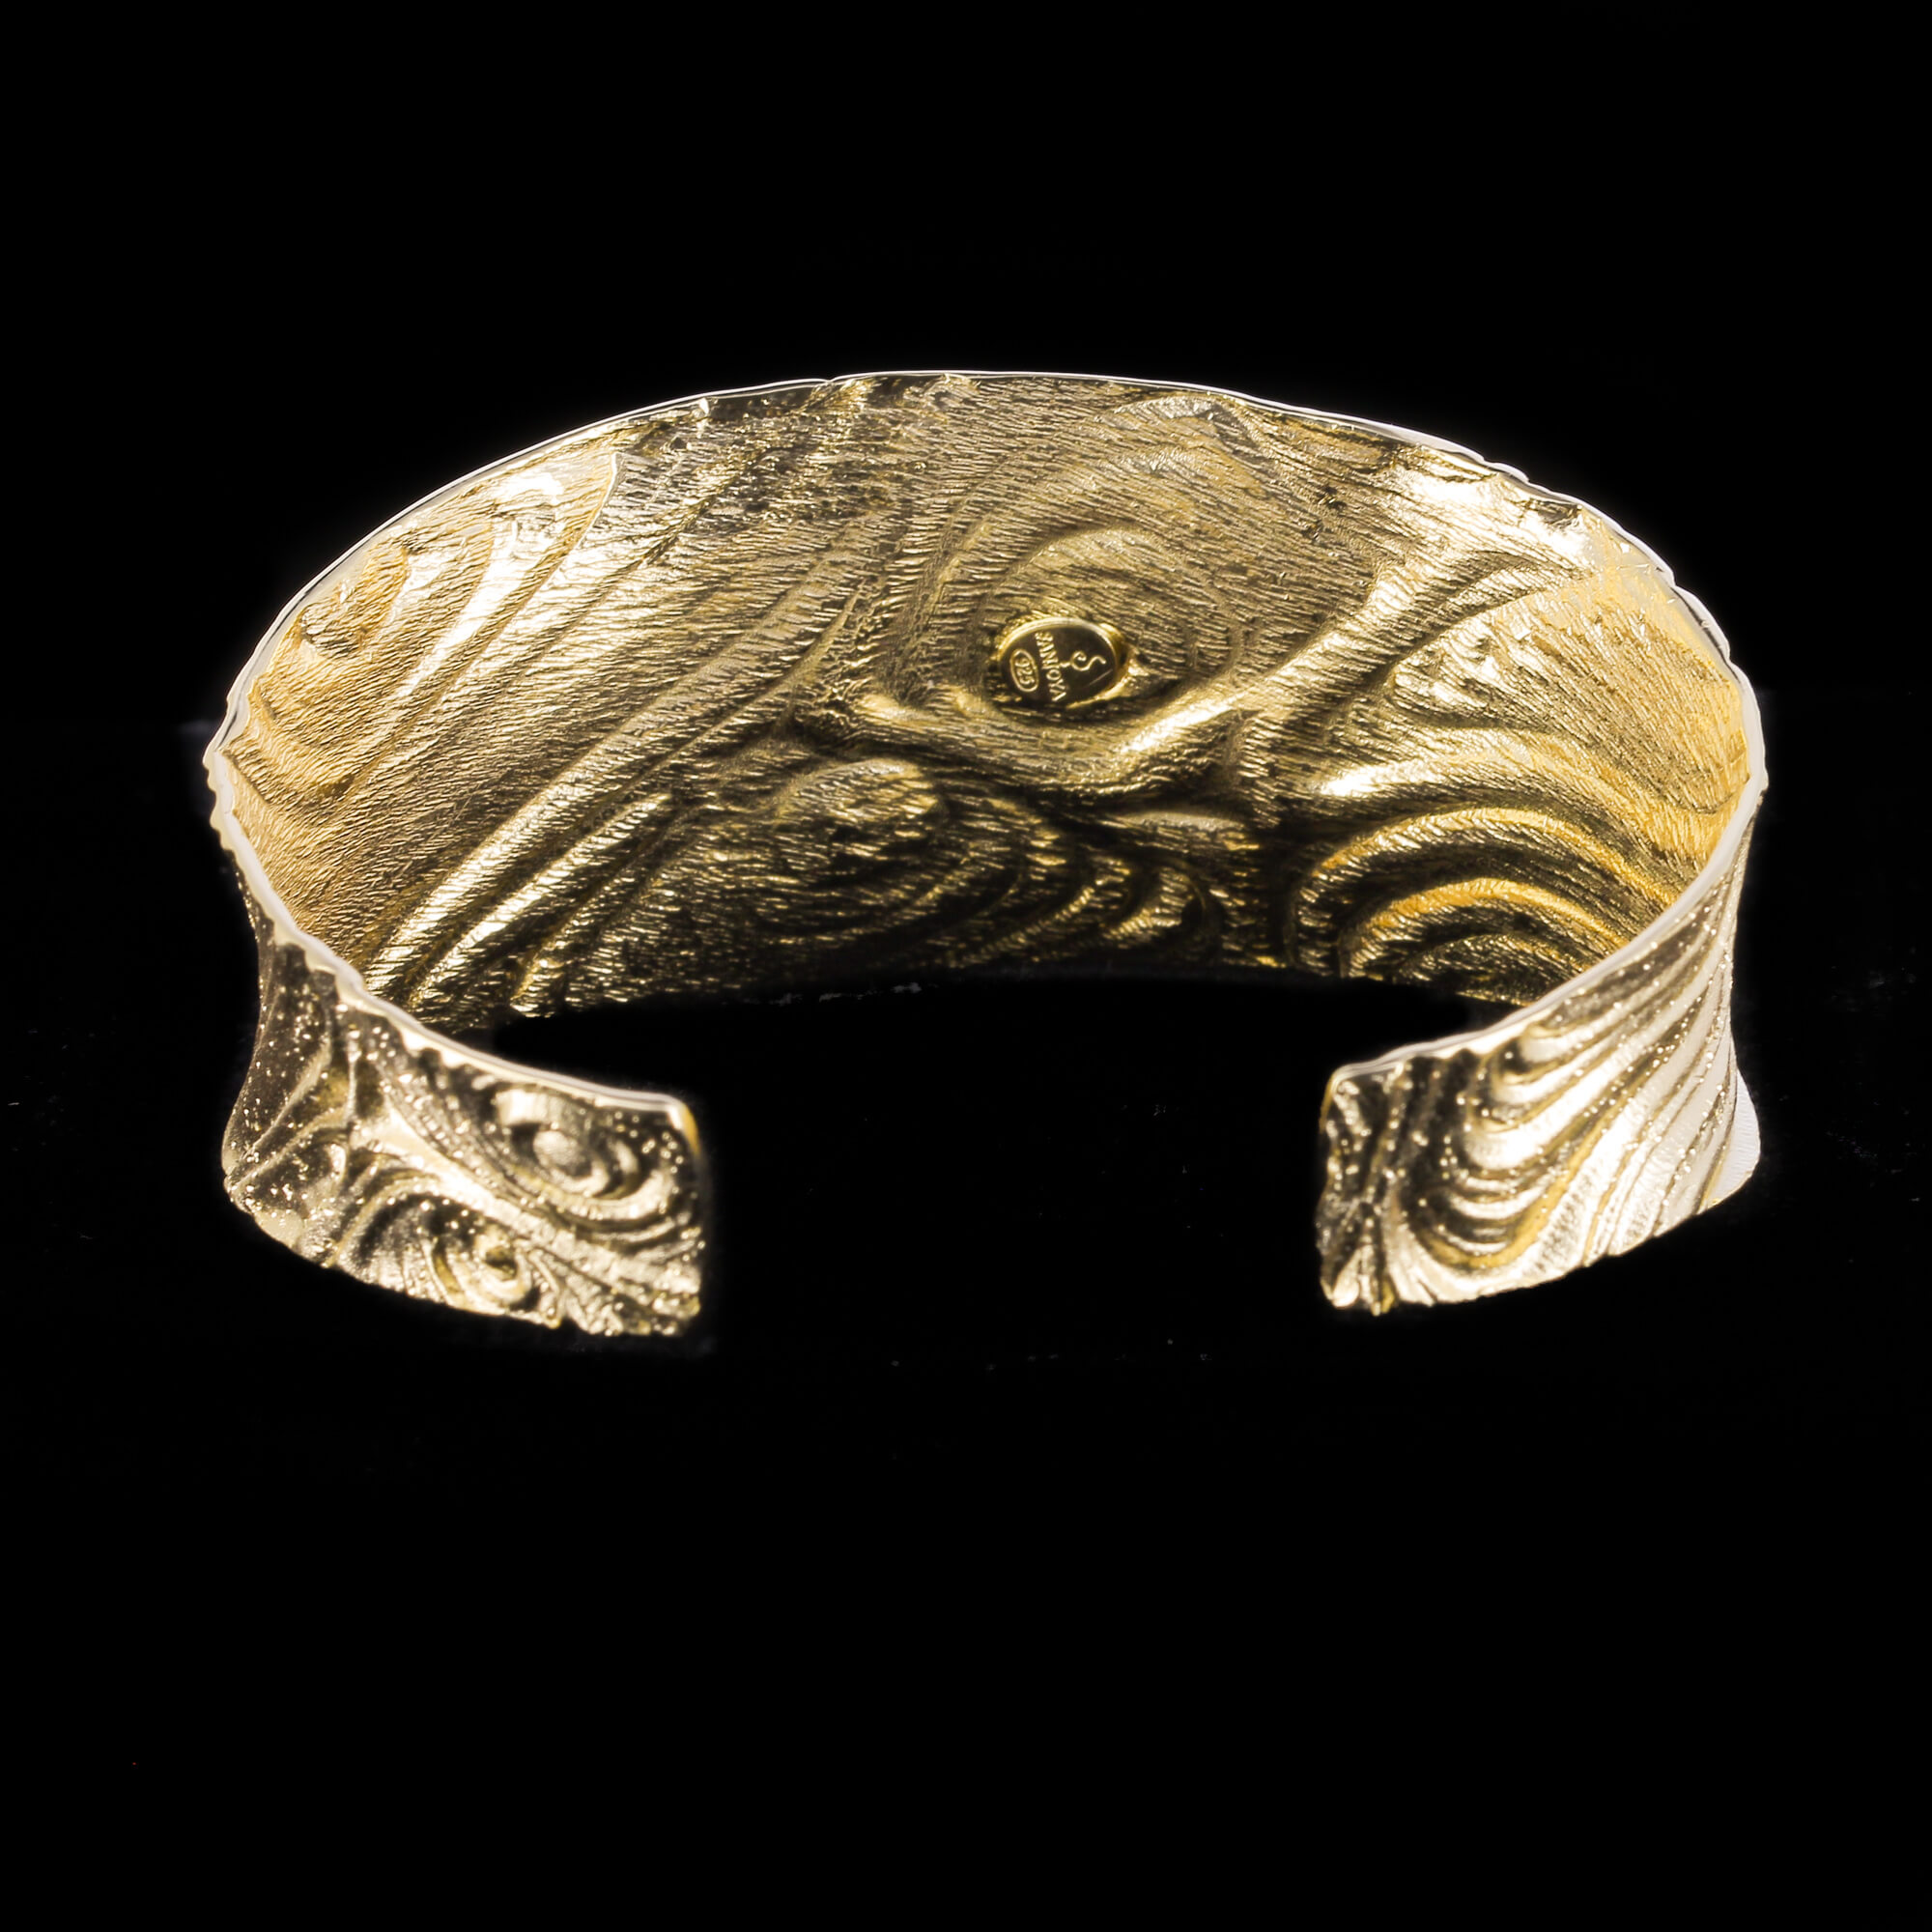 Gold-plated and decorated wide slave bracelet